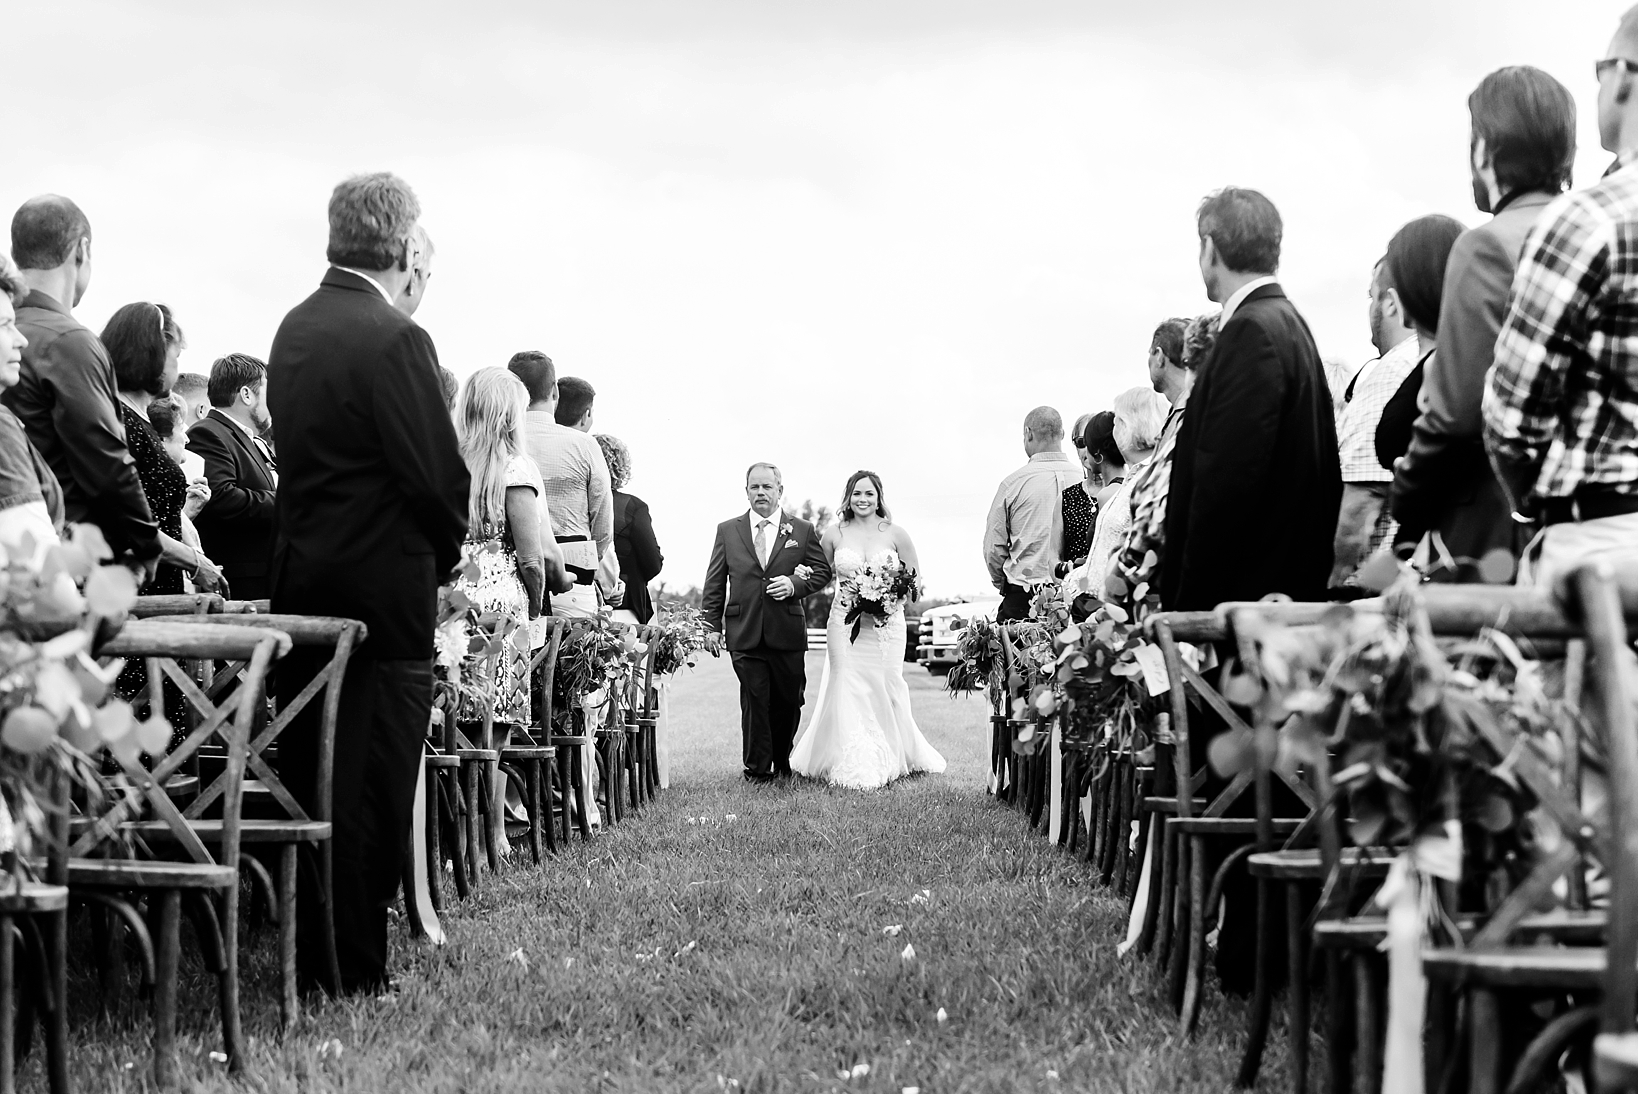 Bride and her father walking down the aisle while guests look on